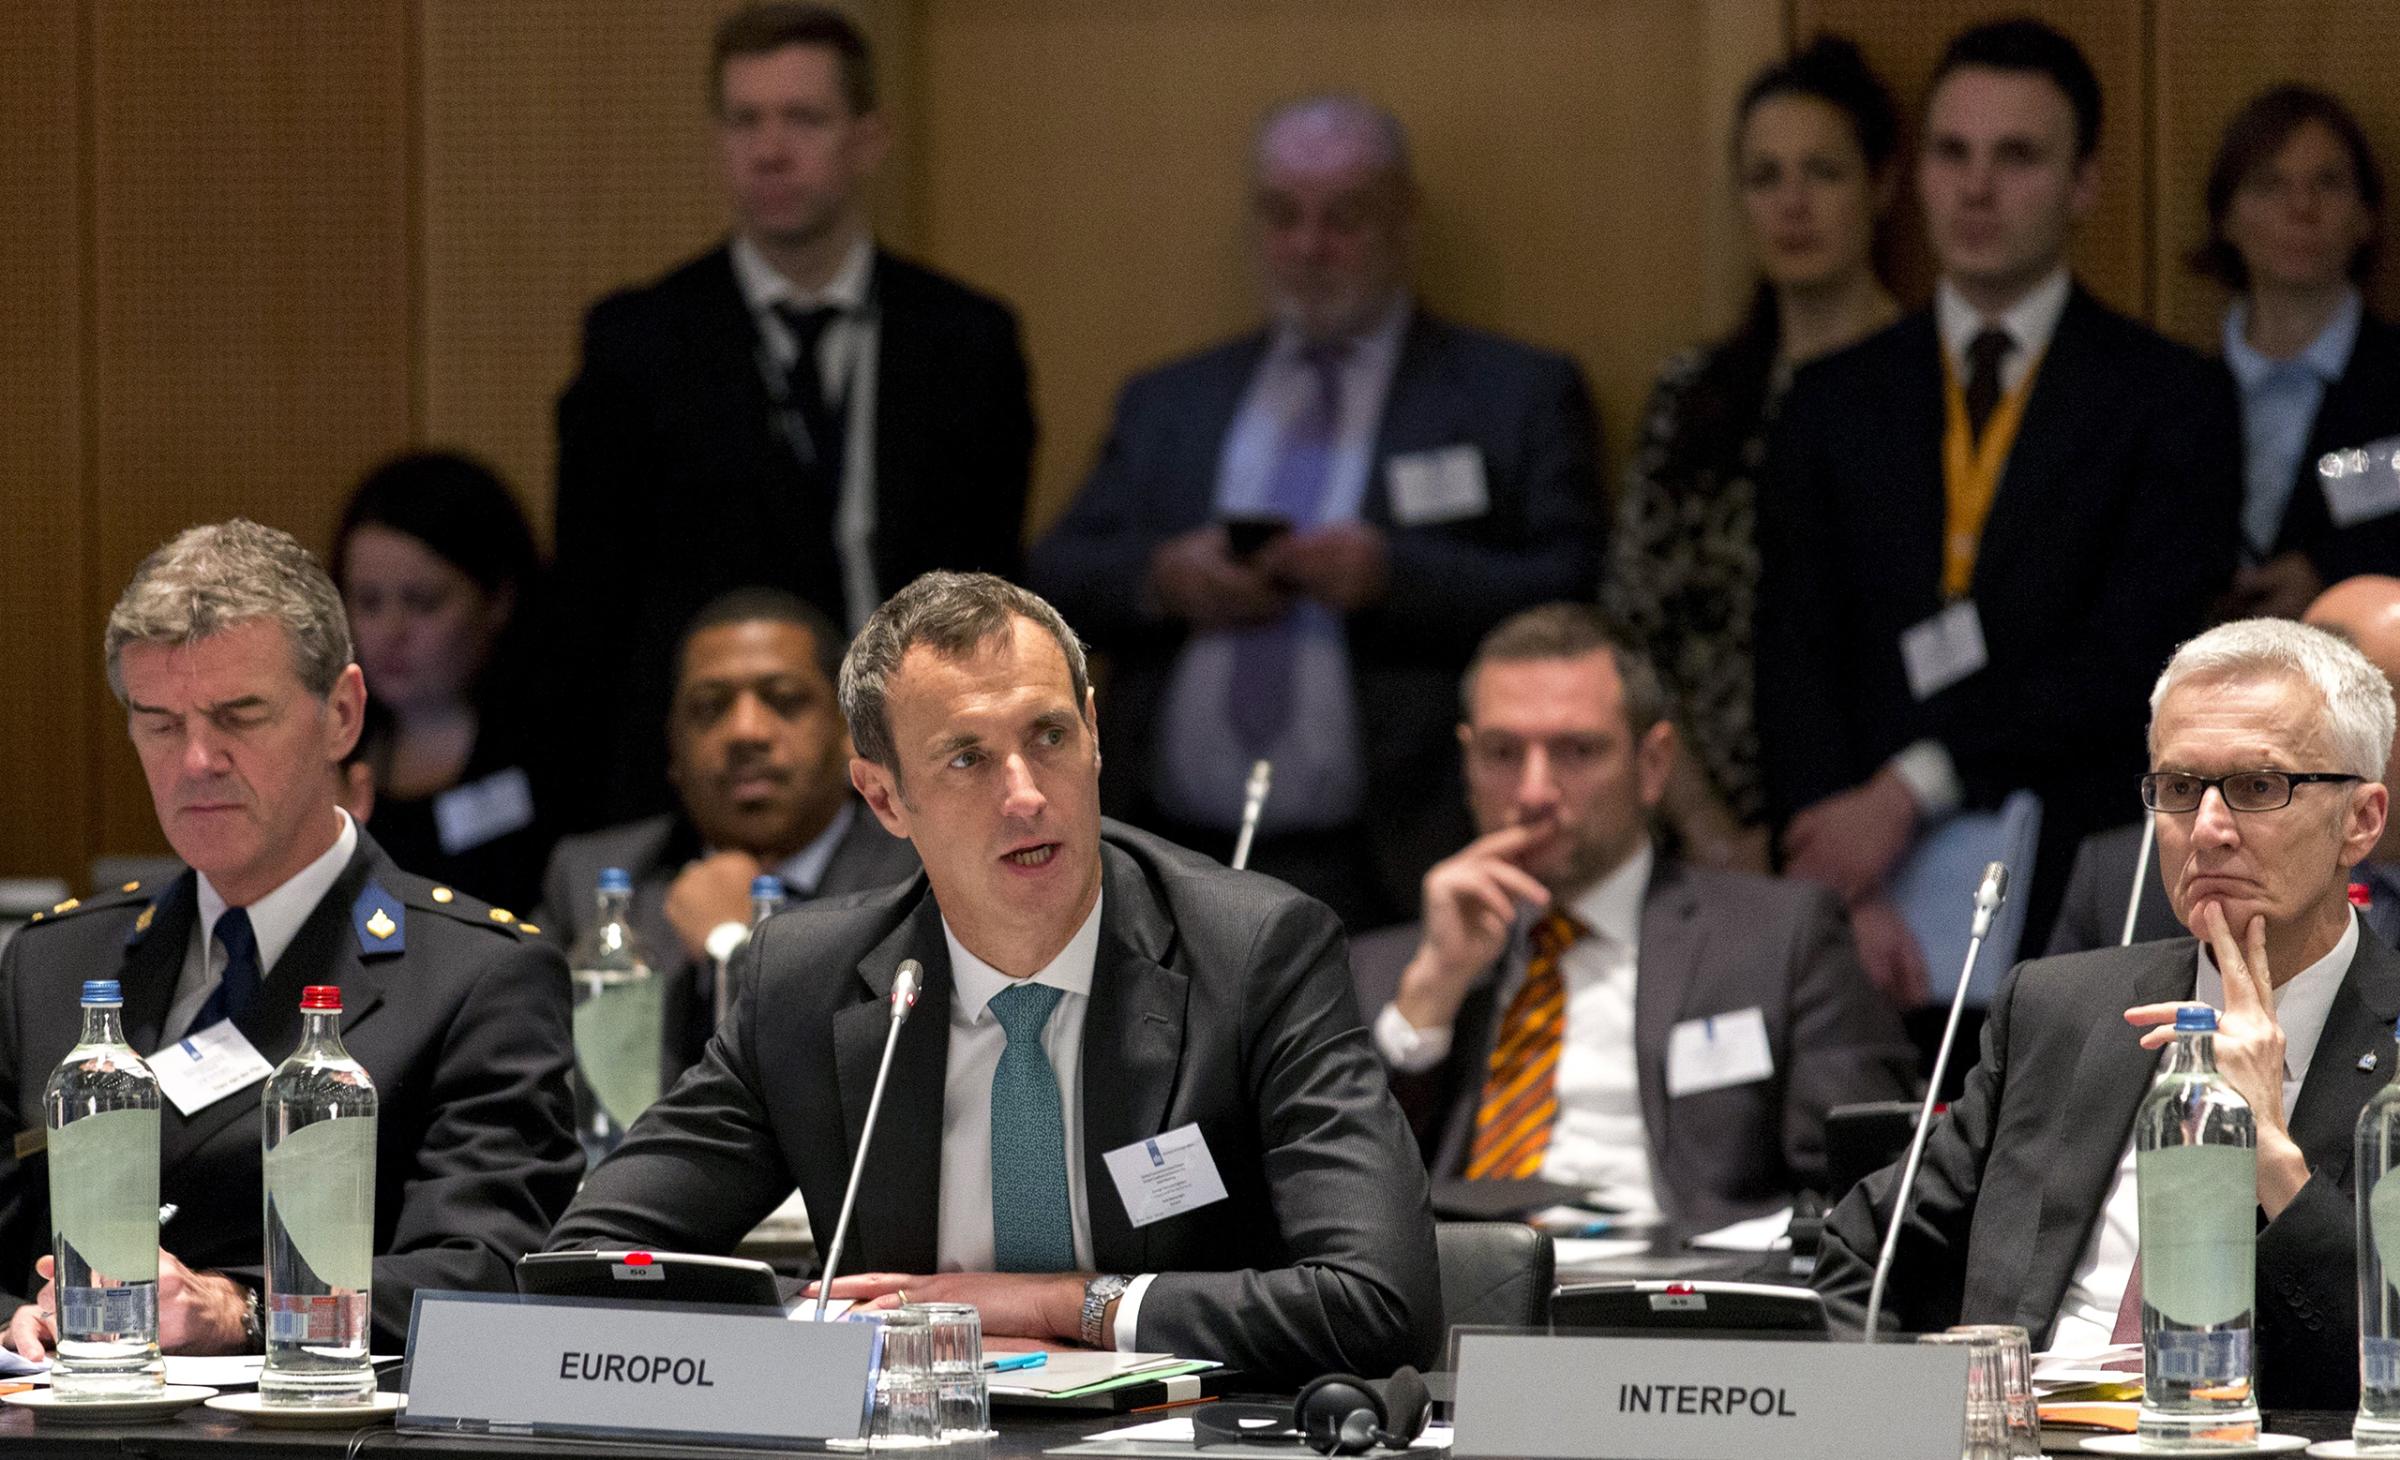 Europol Director Rob Wainwright speaks during the large international consultations with representatives of the Global Counterterrorism Forum and the anti-ISIS coalition in the fight against terror at the Europol headquarters in The Hague on Jan. 11, 2016.